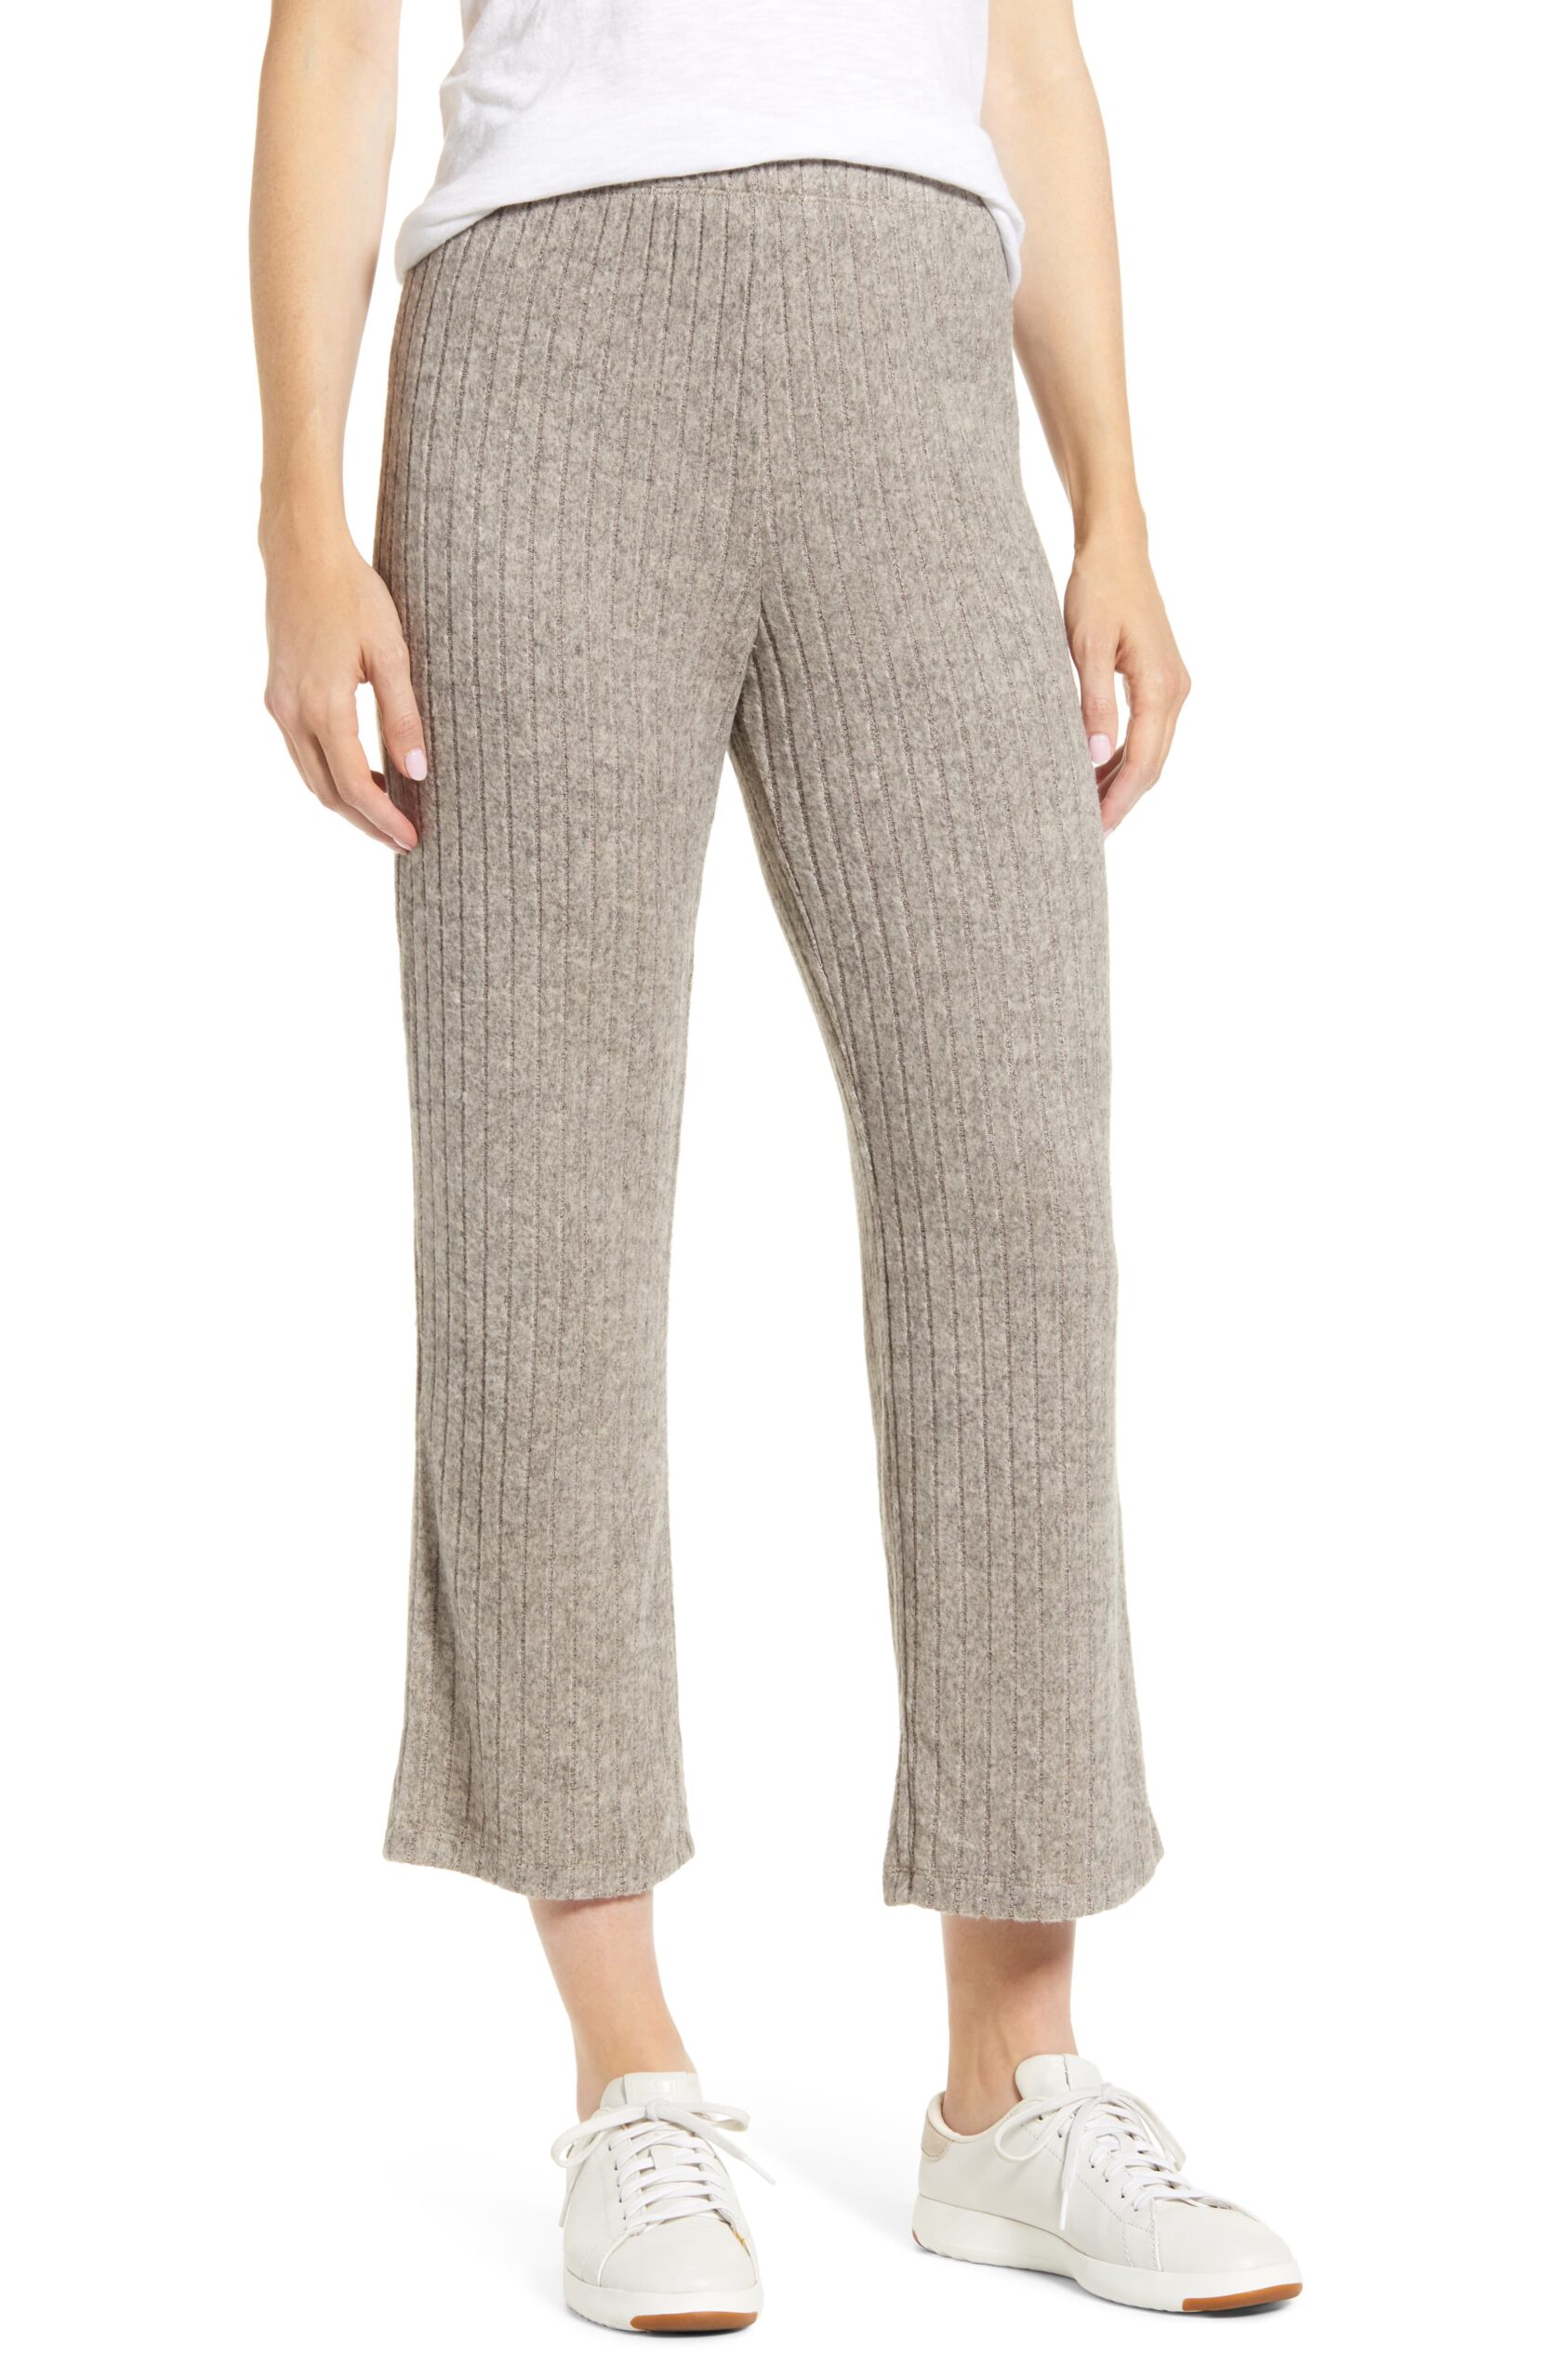 Weekly Finds, including these awesome BOBEAU Ribbed Knit Ankle Pants